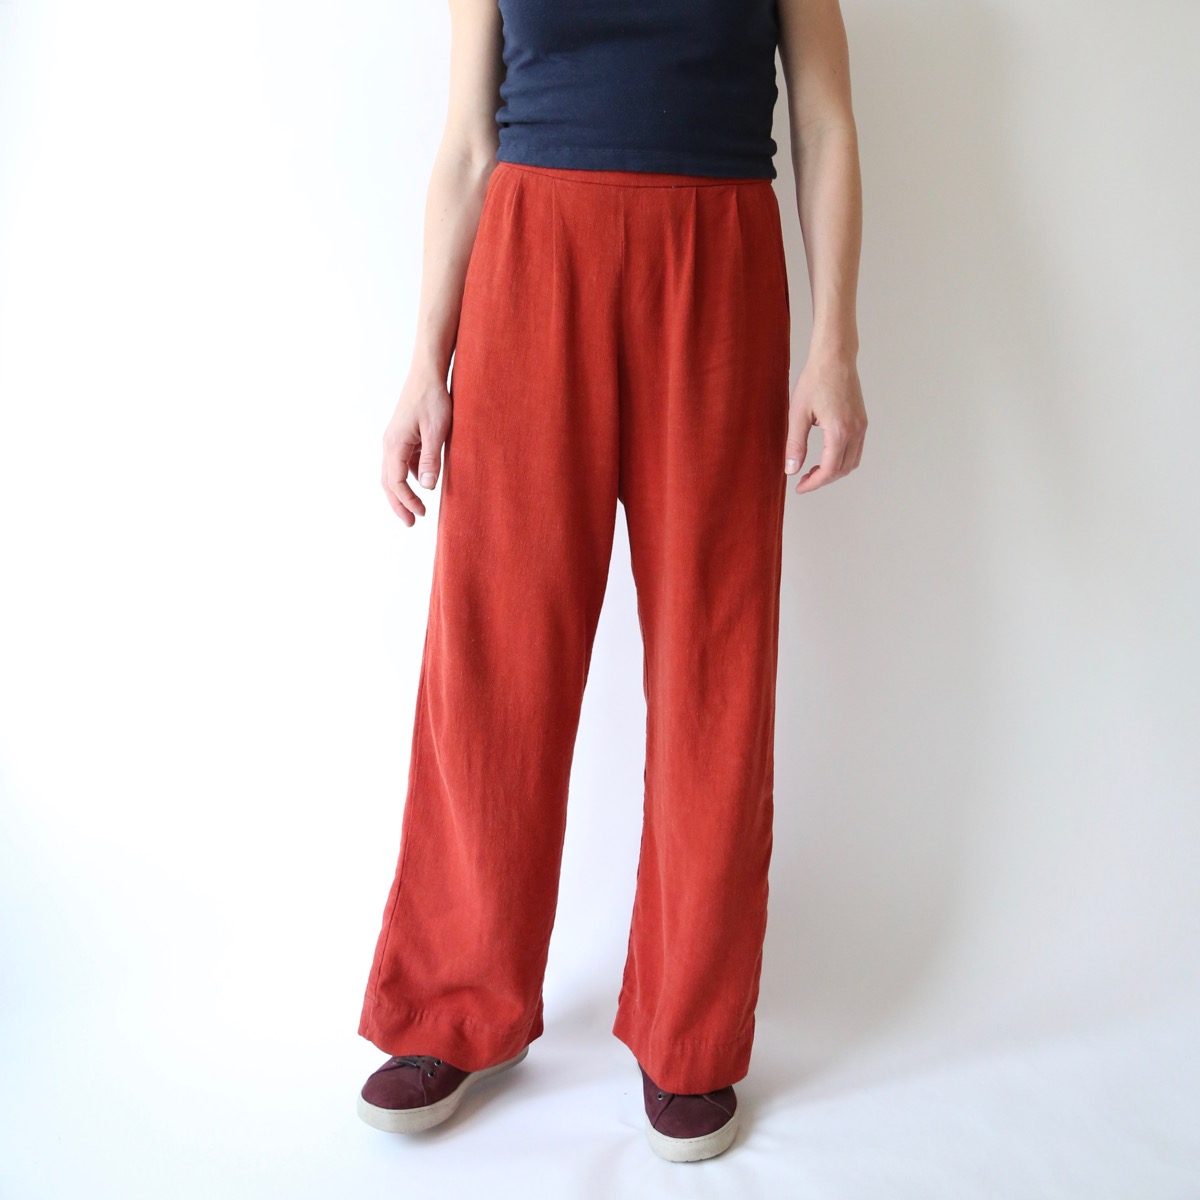 Rose Pants In Viscose Linen Made By Rae,Thai Green Curry Recipe Jamie Oliver